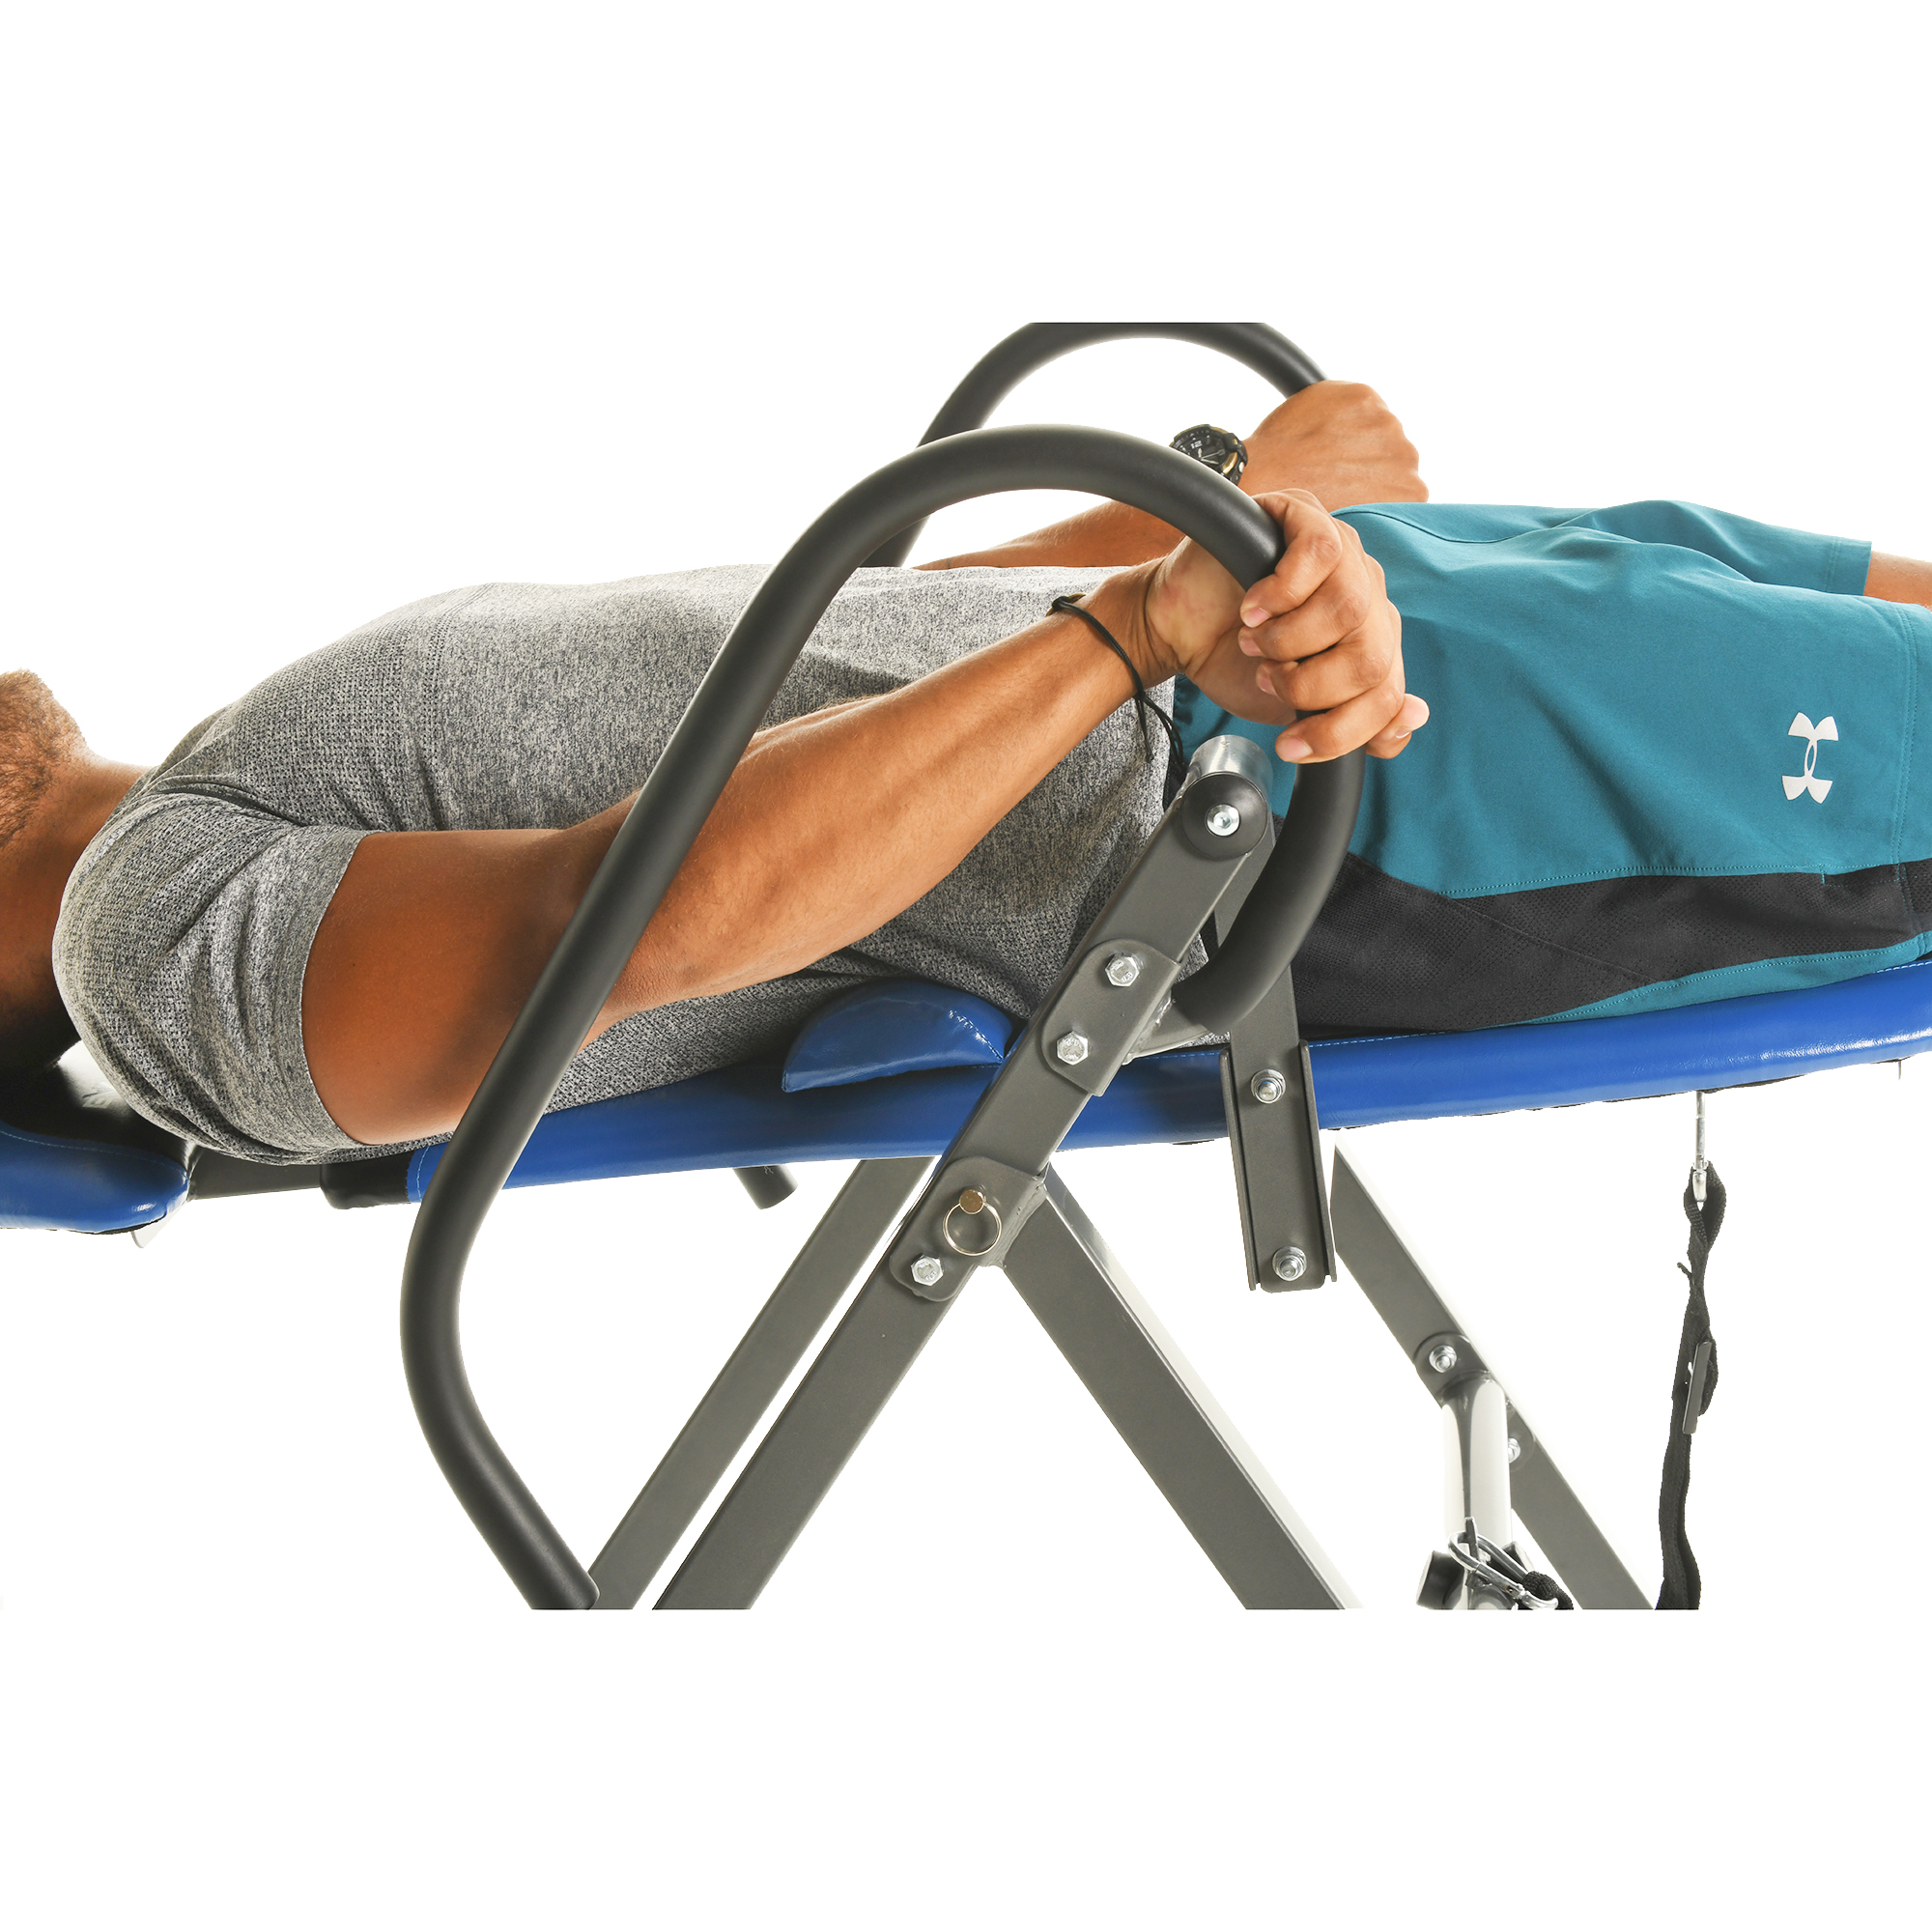 Exerpeutic 150L Triple Safety Locking Inversion Table with Secondary Auto Safety Lock, Visual Lock Indicator and Lumbar Pillow - image 5 of 5